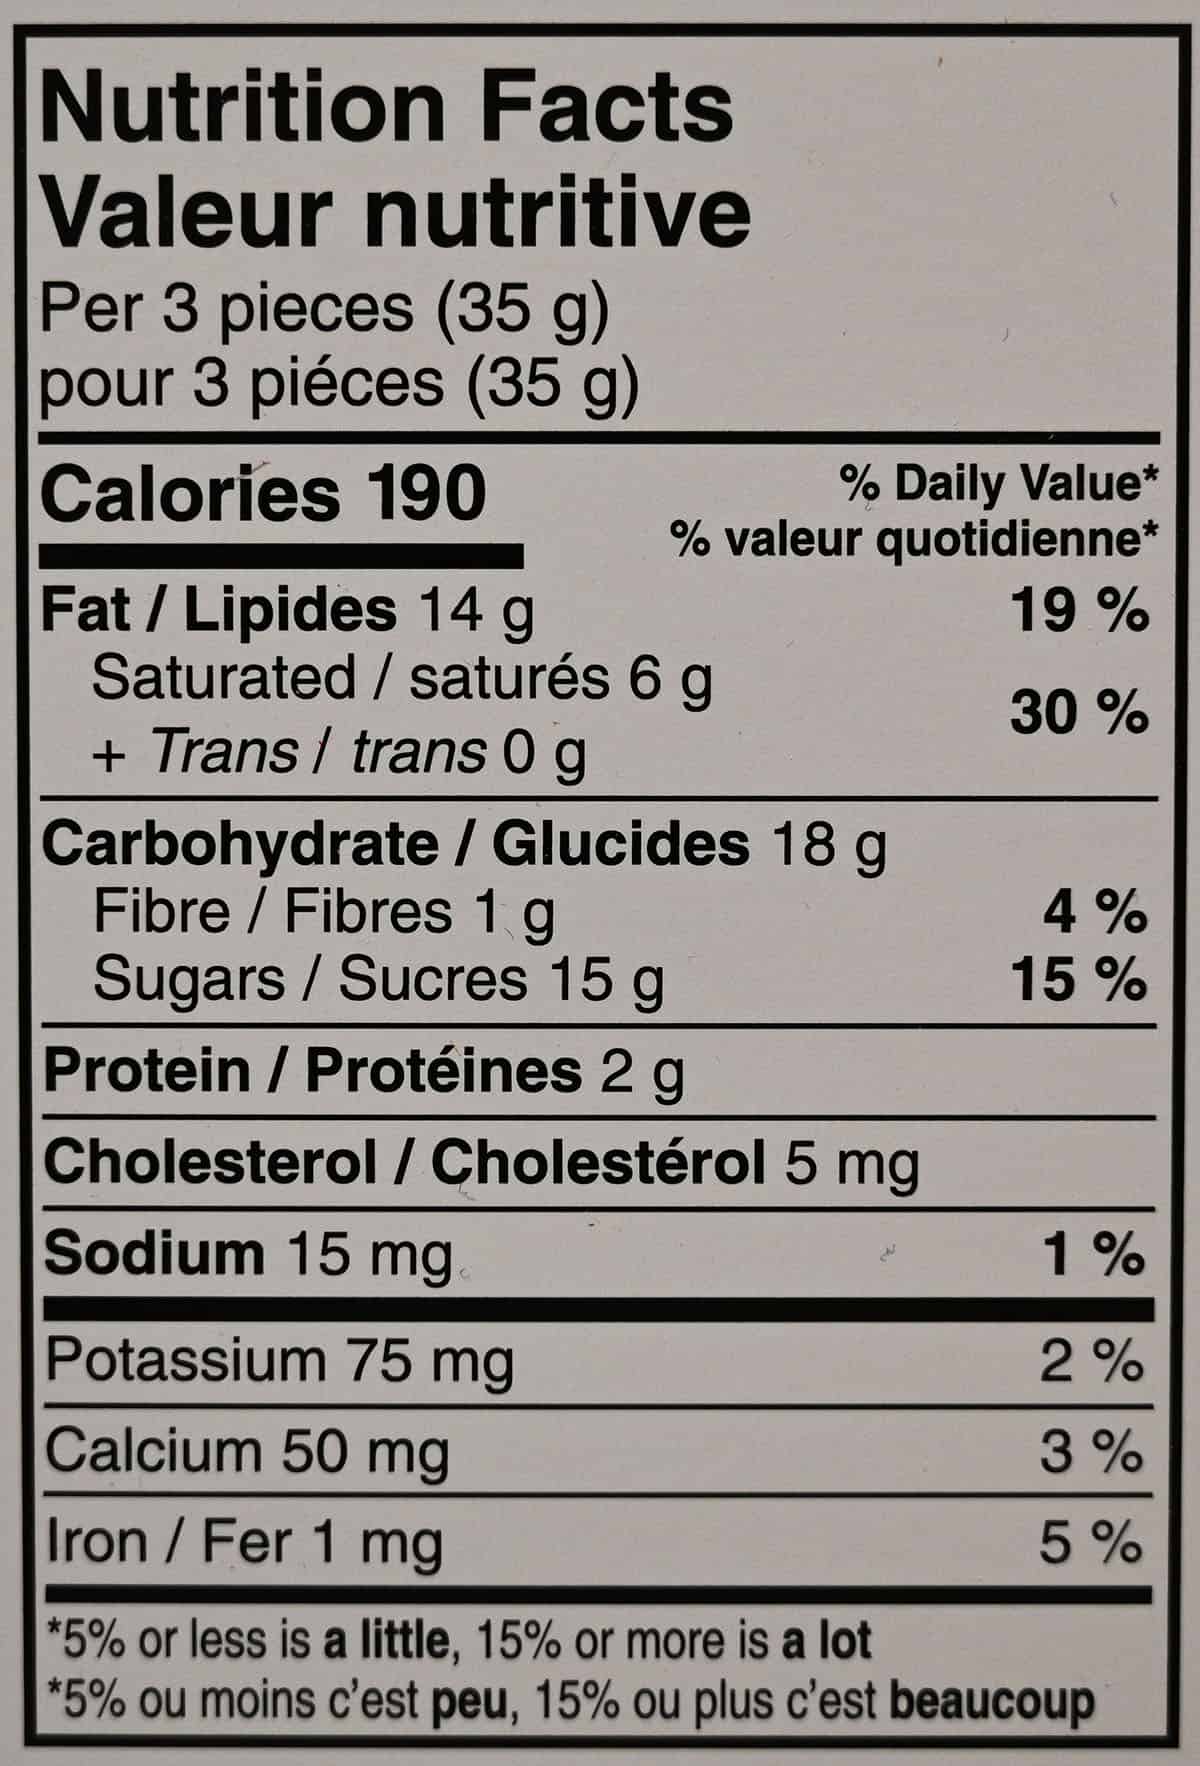 Image of the nutrition facts from the back of the box.